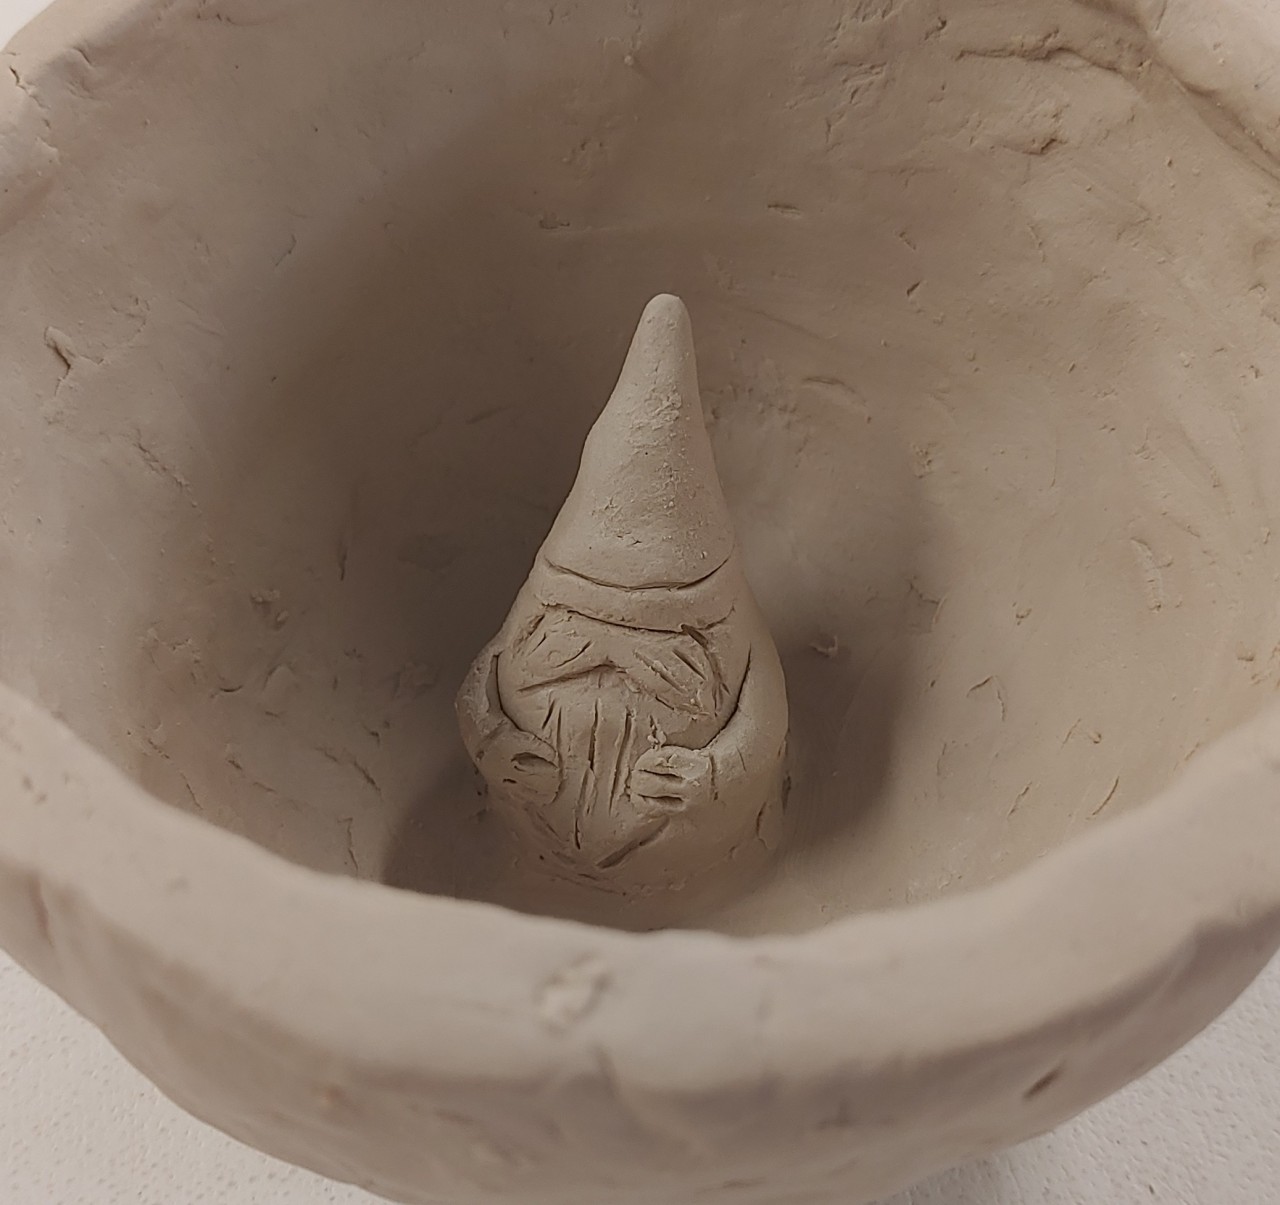 amygdalae:amygdalae:Day 1 of ceramics class… Secret gnome will live under the soupI’d like to report that soup gnome made it through unscathed!